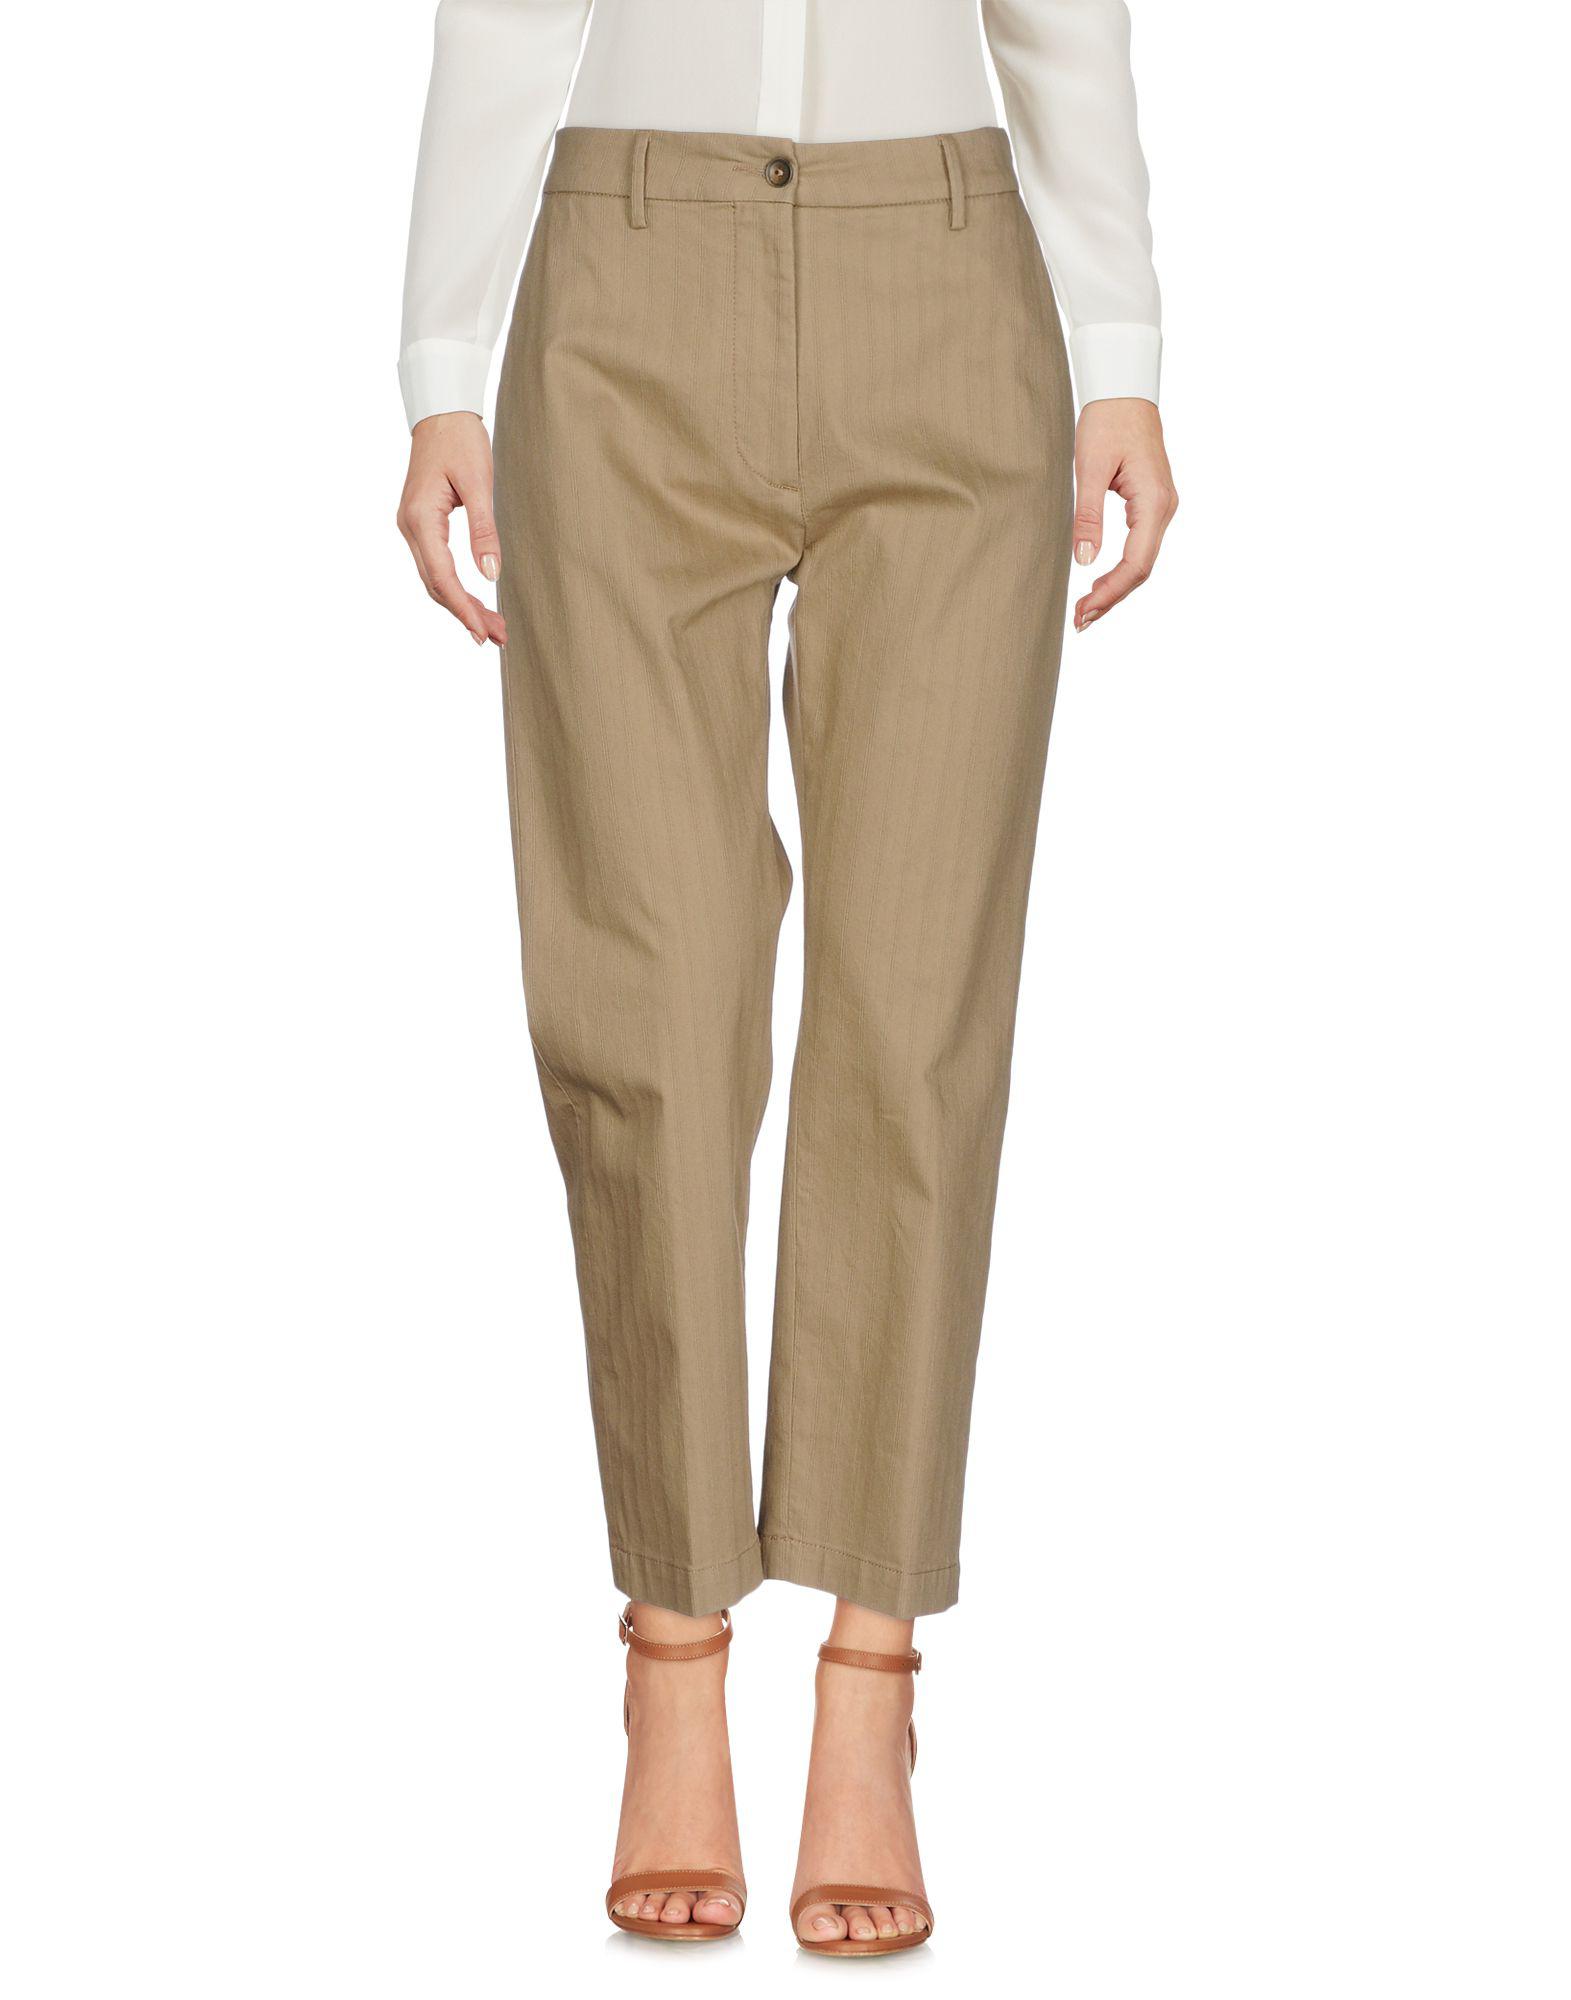 Pence Cotton Casual Trouser in Khaki (Natural) - Lyst